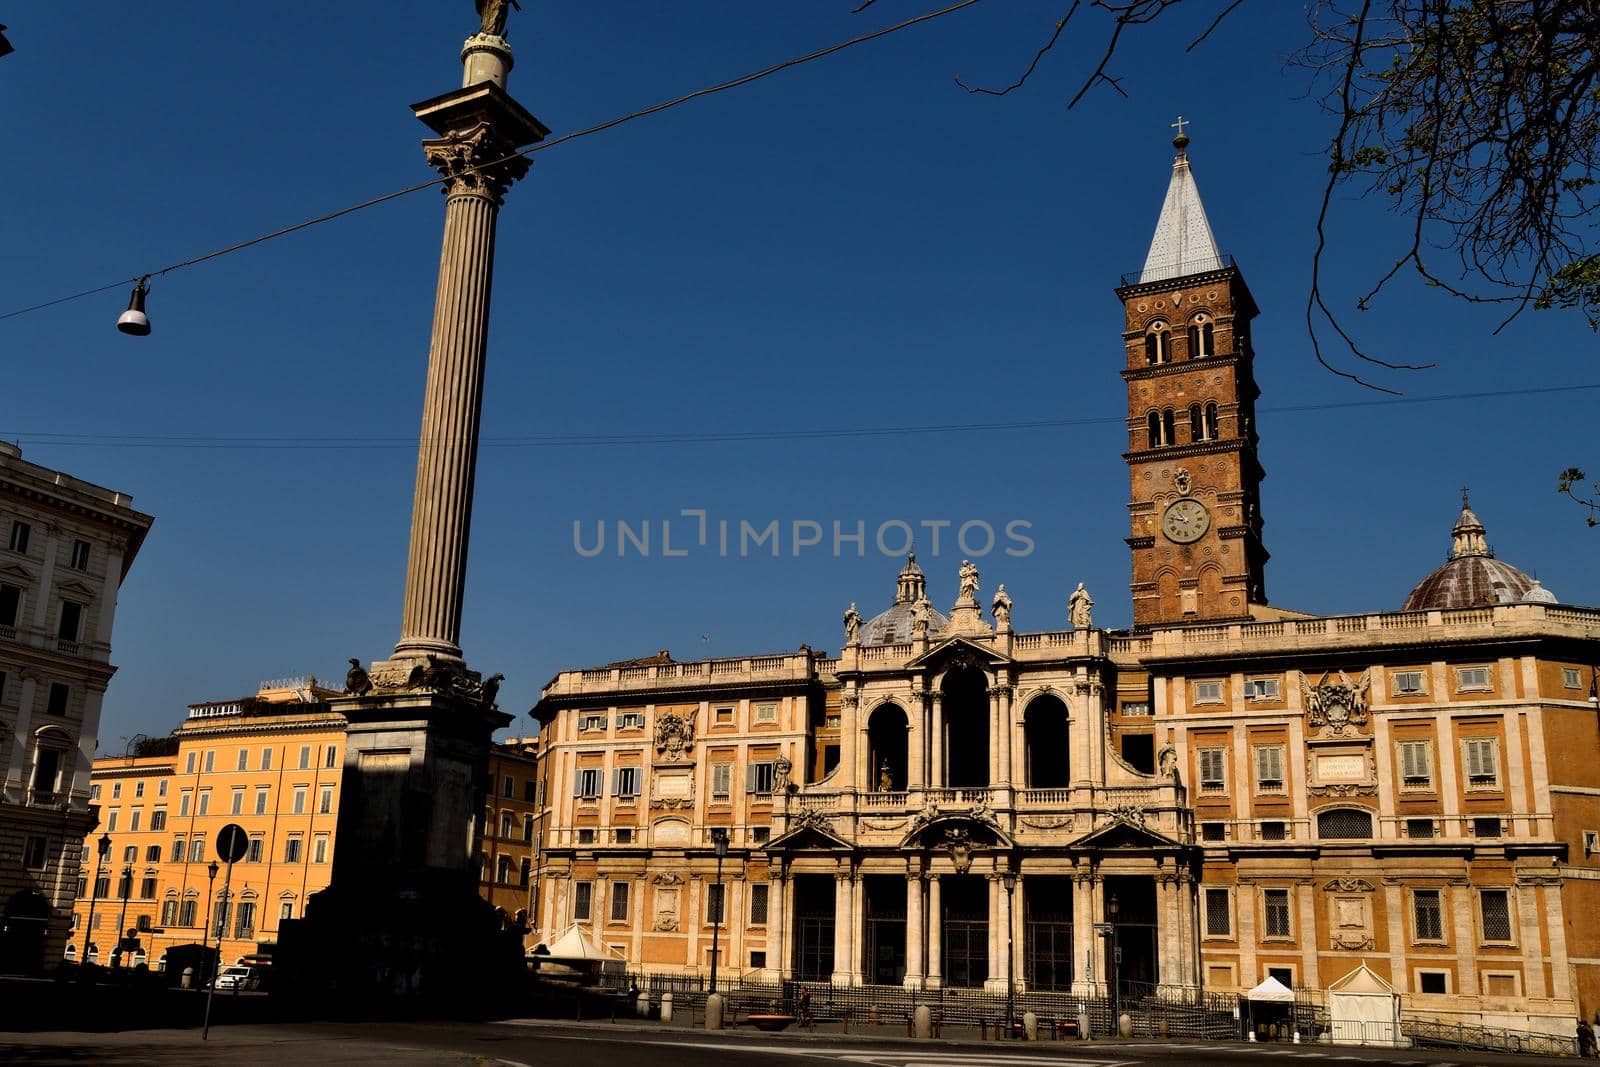 View of the Basilica di Santa Maria Maggiore without tourists due to the lockdown by silentstock639